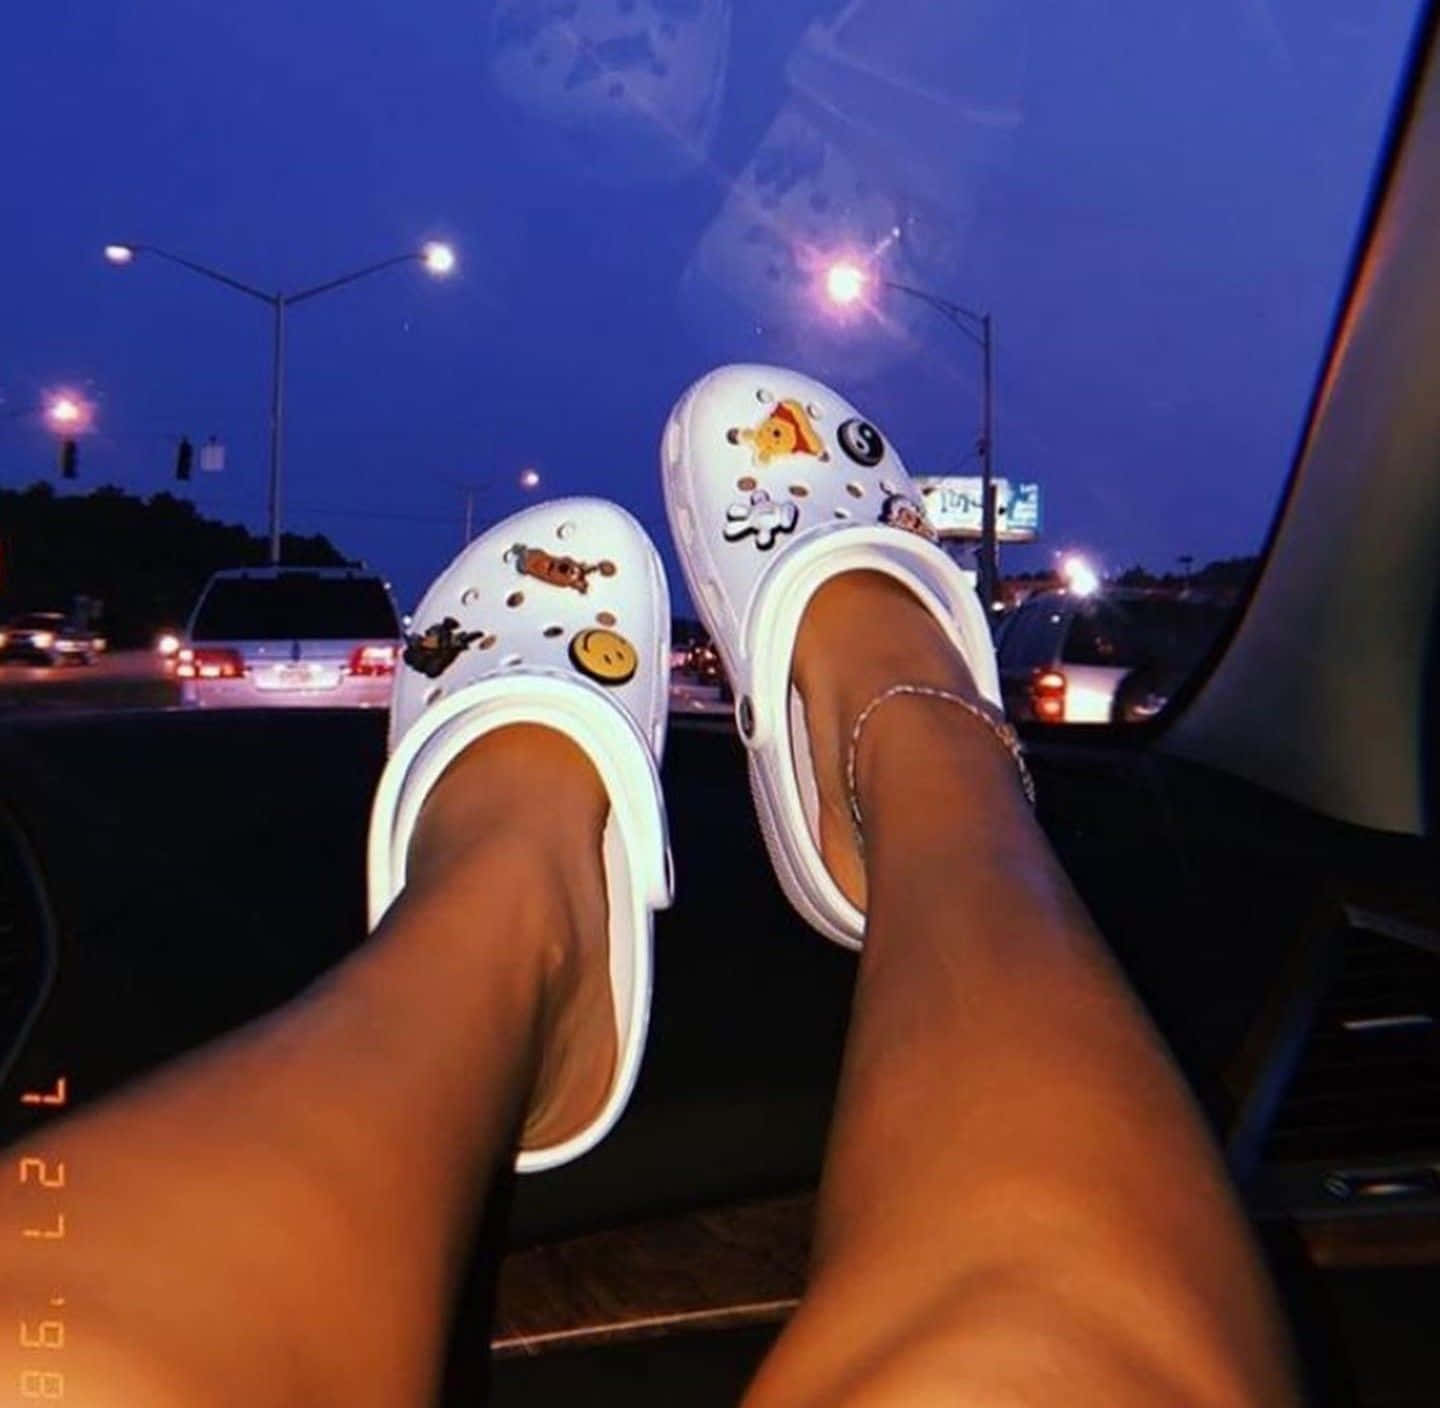 A Woman's Feet Sitting In A Car Wearing White Clogs